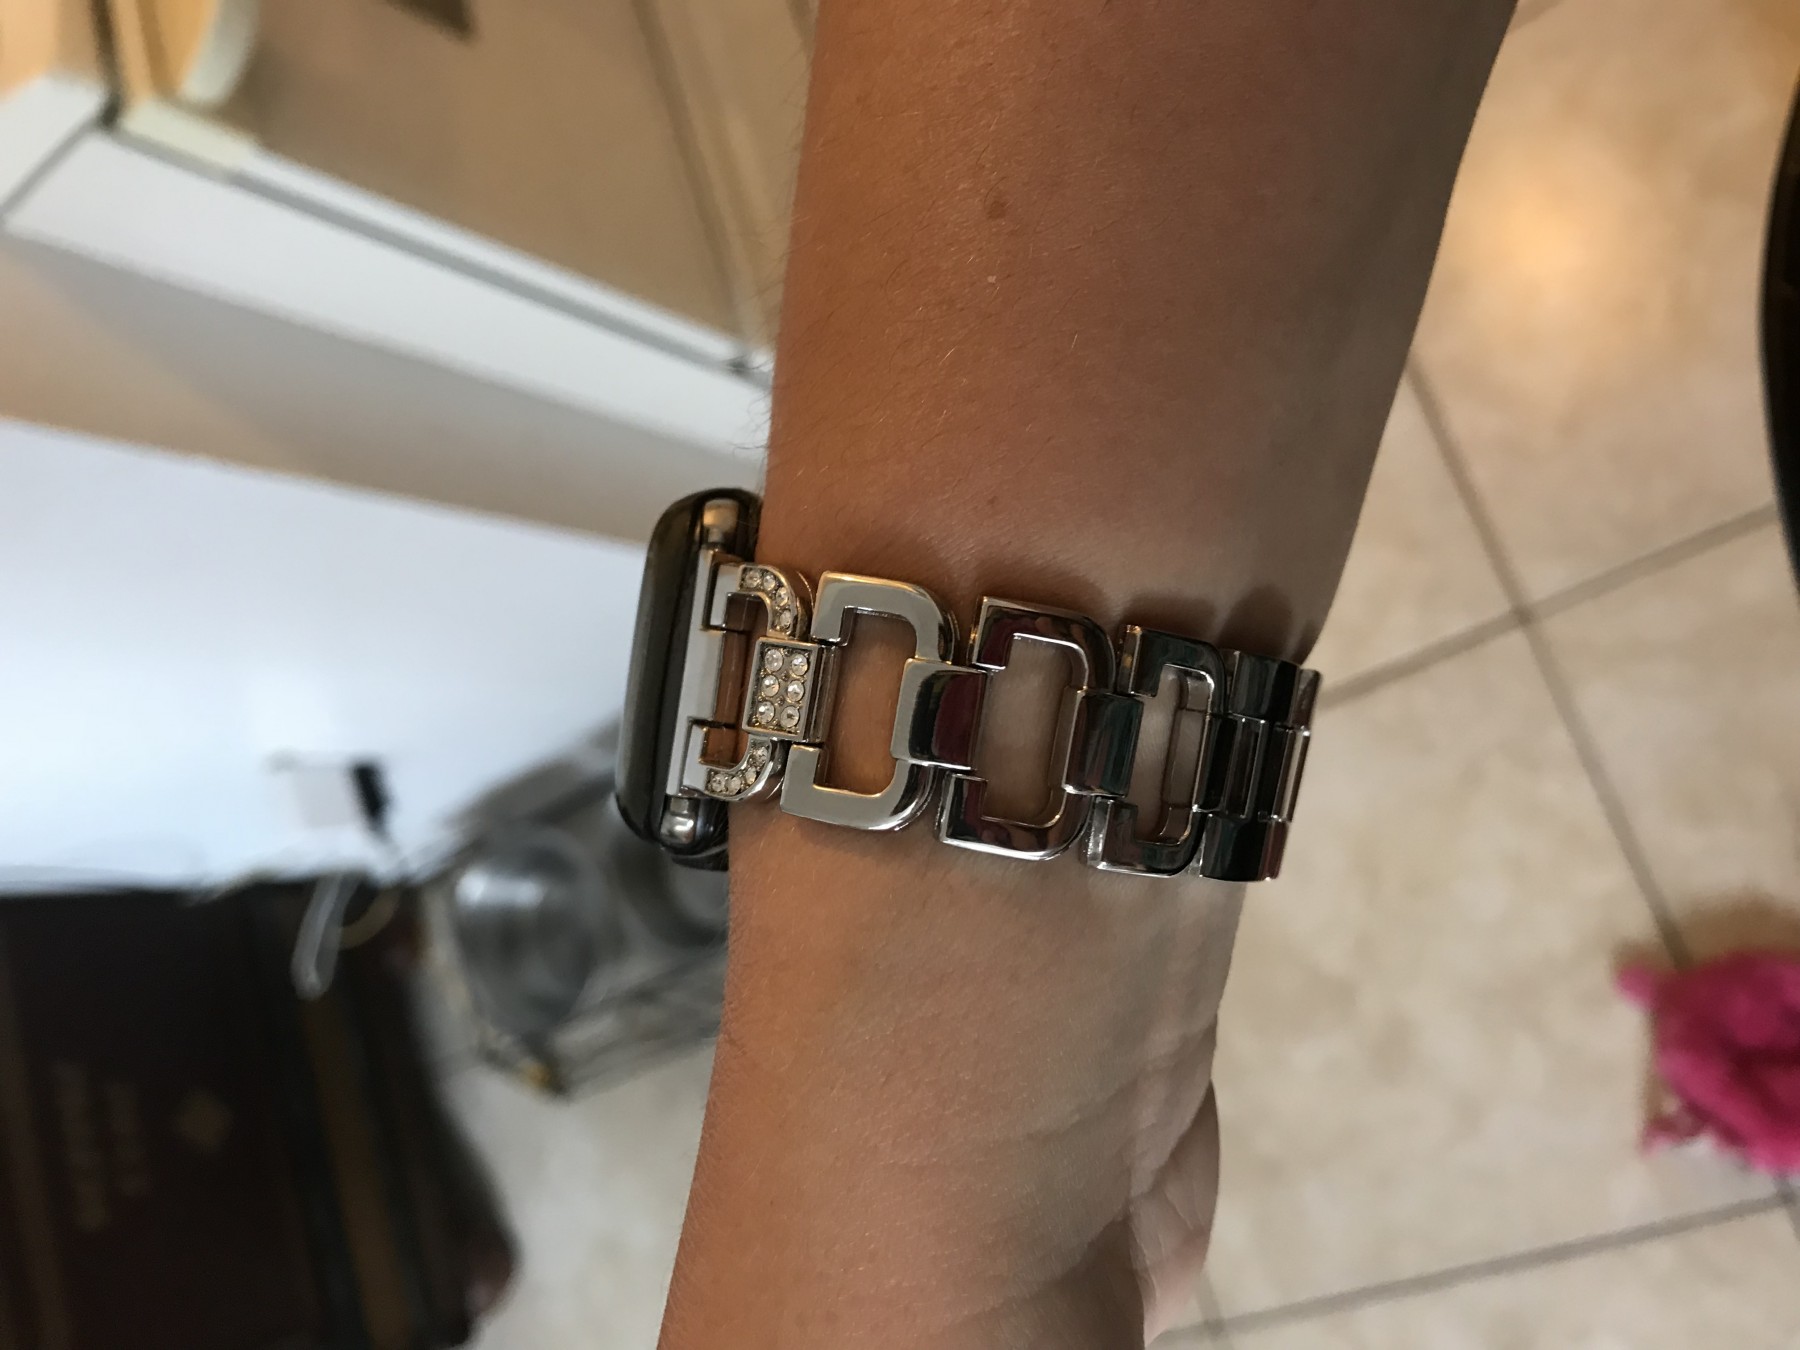 Great Watch Band!